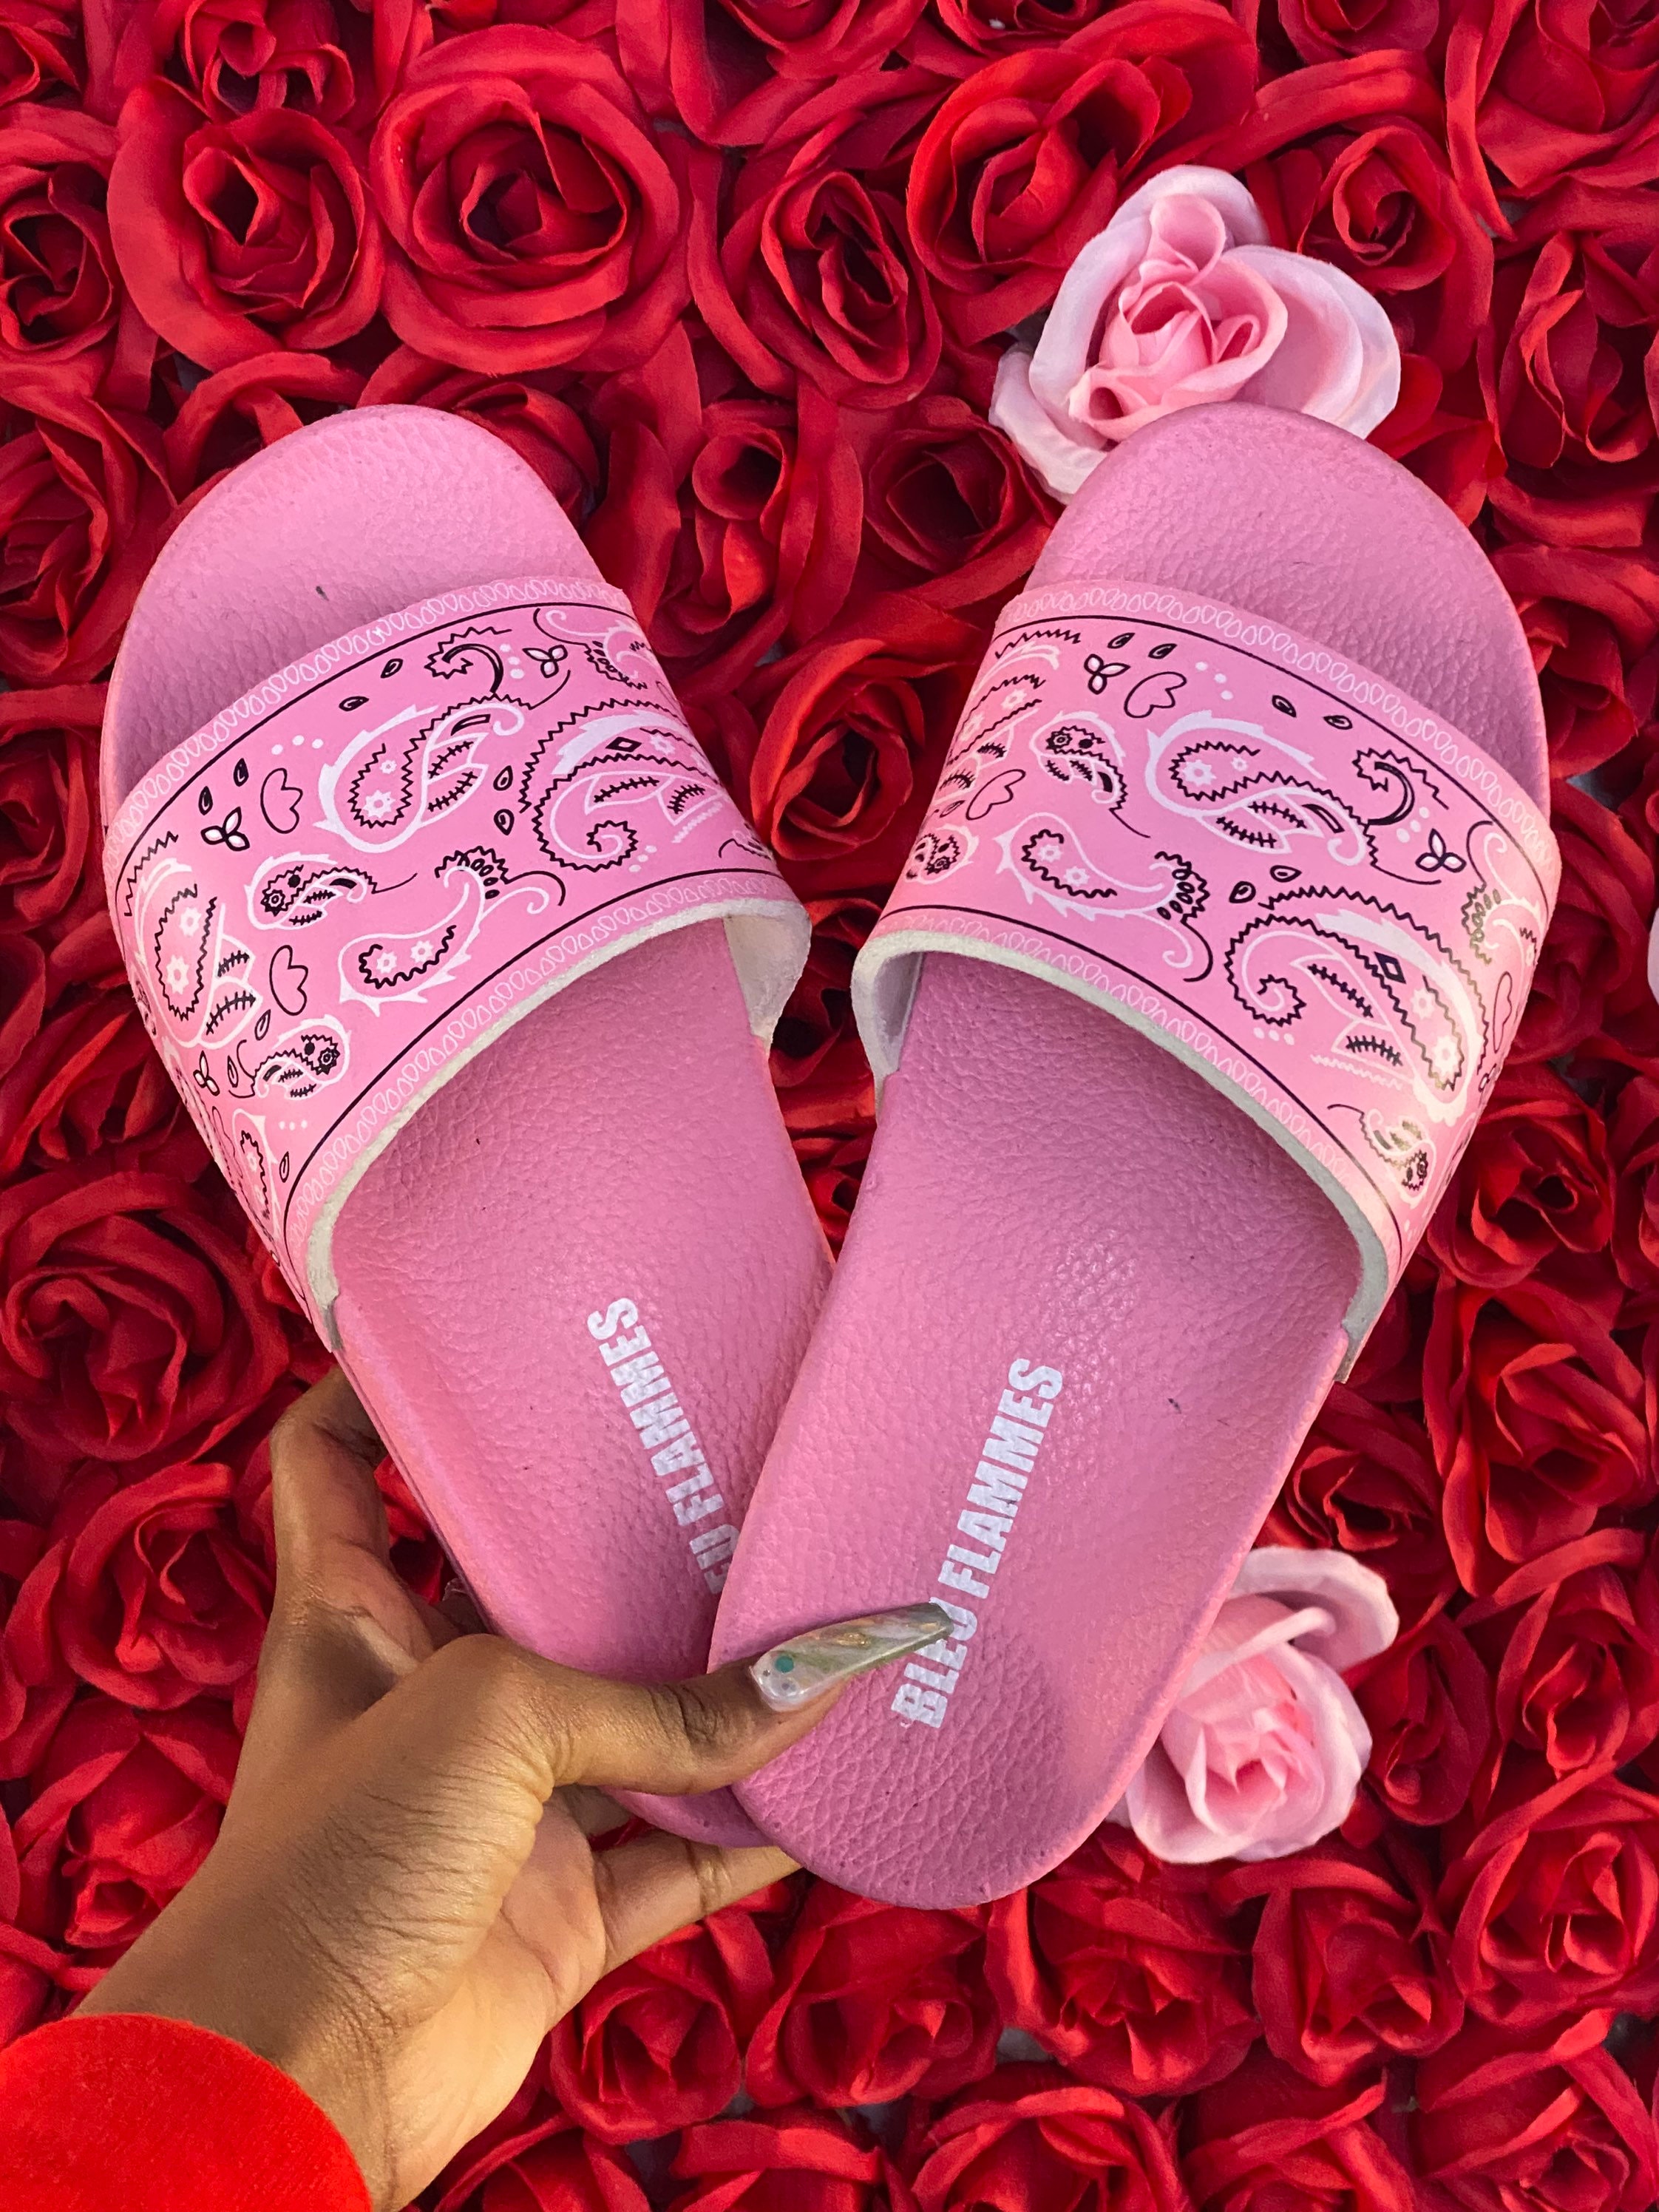 610 - nike girl slides pink and shoes sneakers sandals - Supreme x